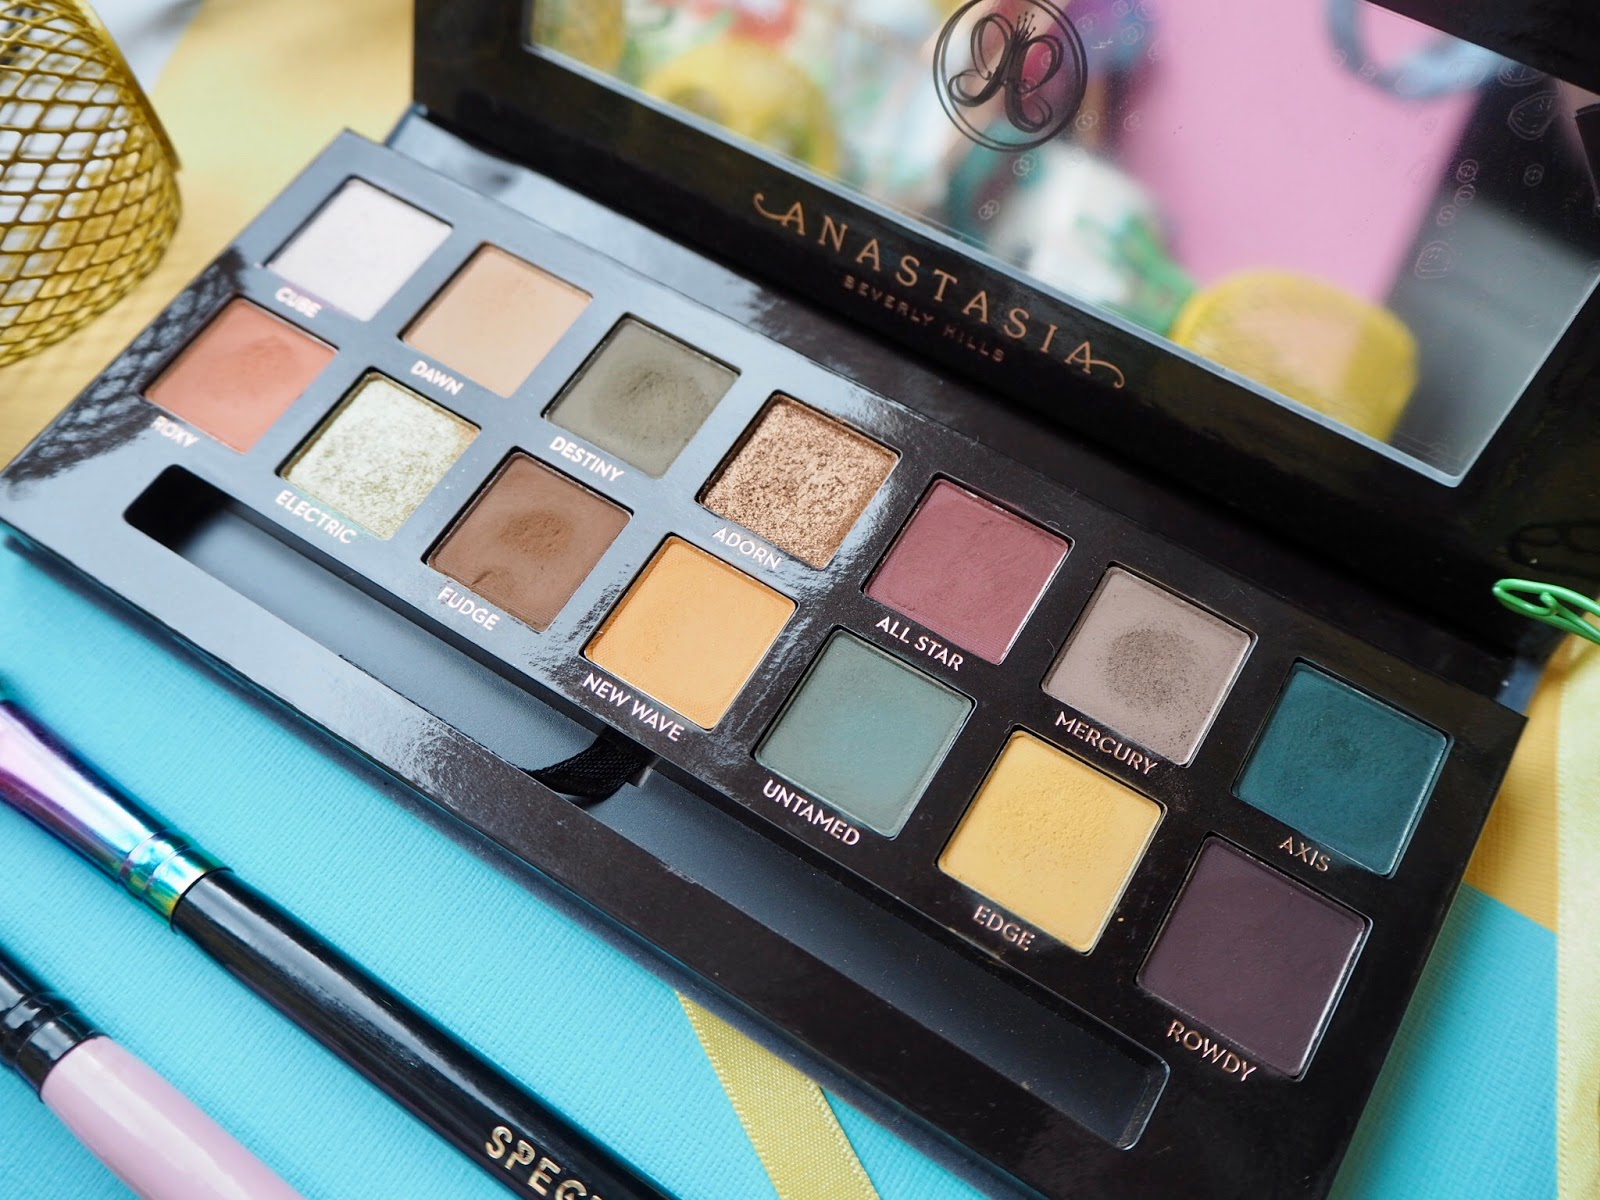 Anastasia Beverley Hills Subculture Palette swatches